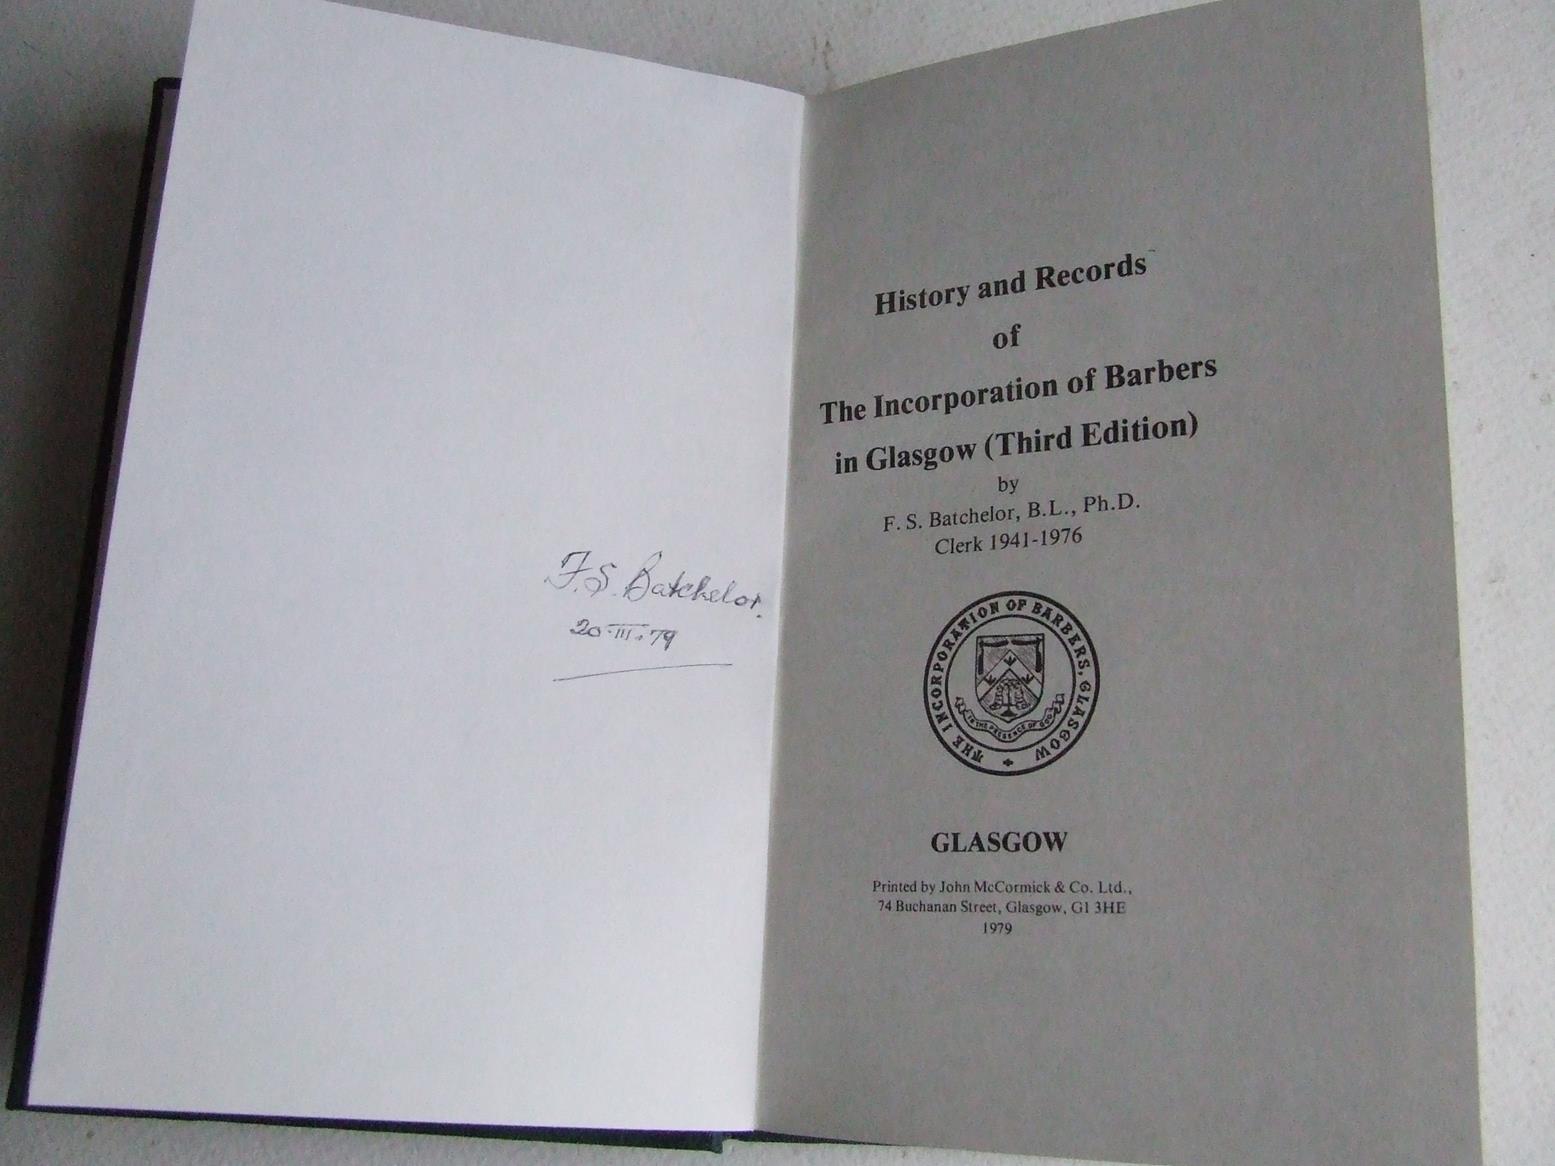 History and Records of the Incorporation of Barbers in Glasgow (third edition)